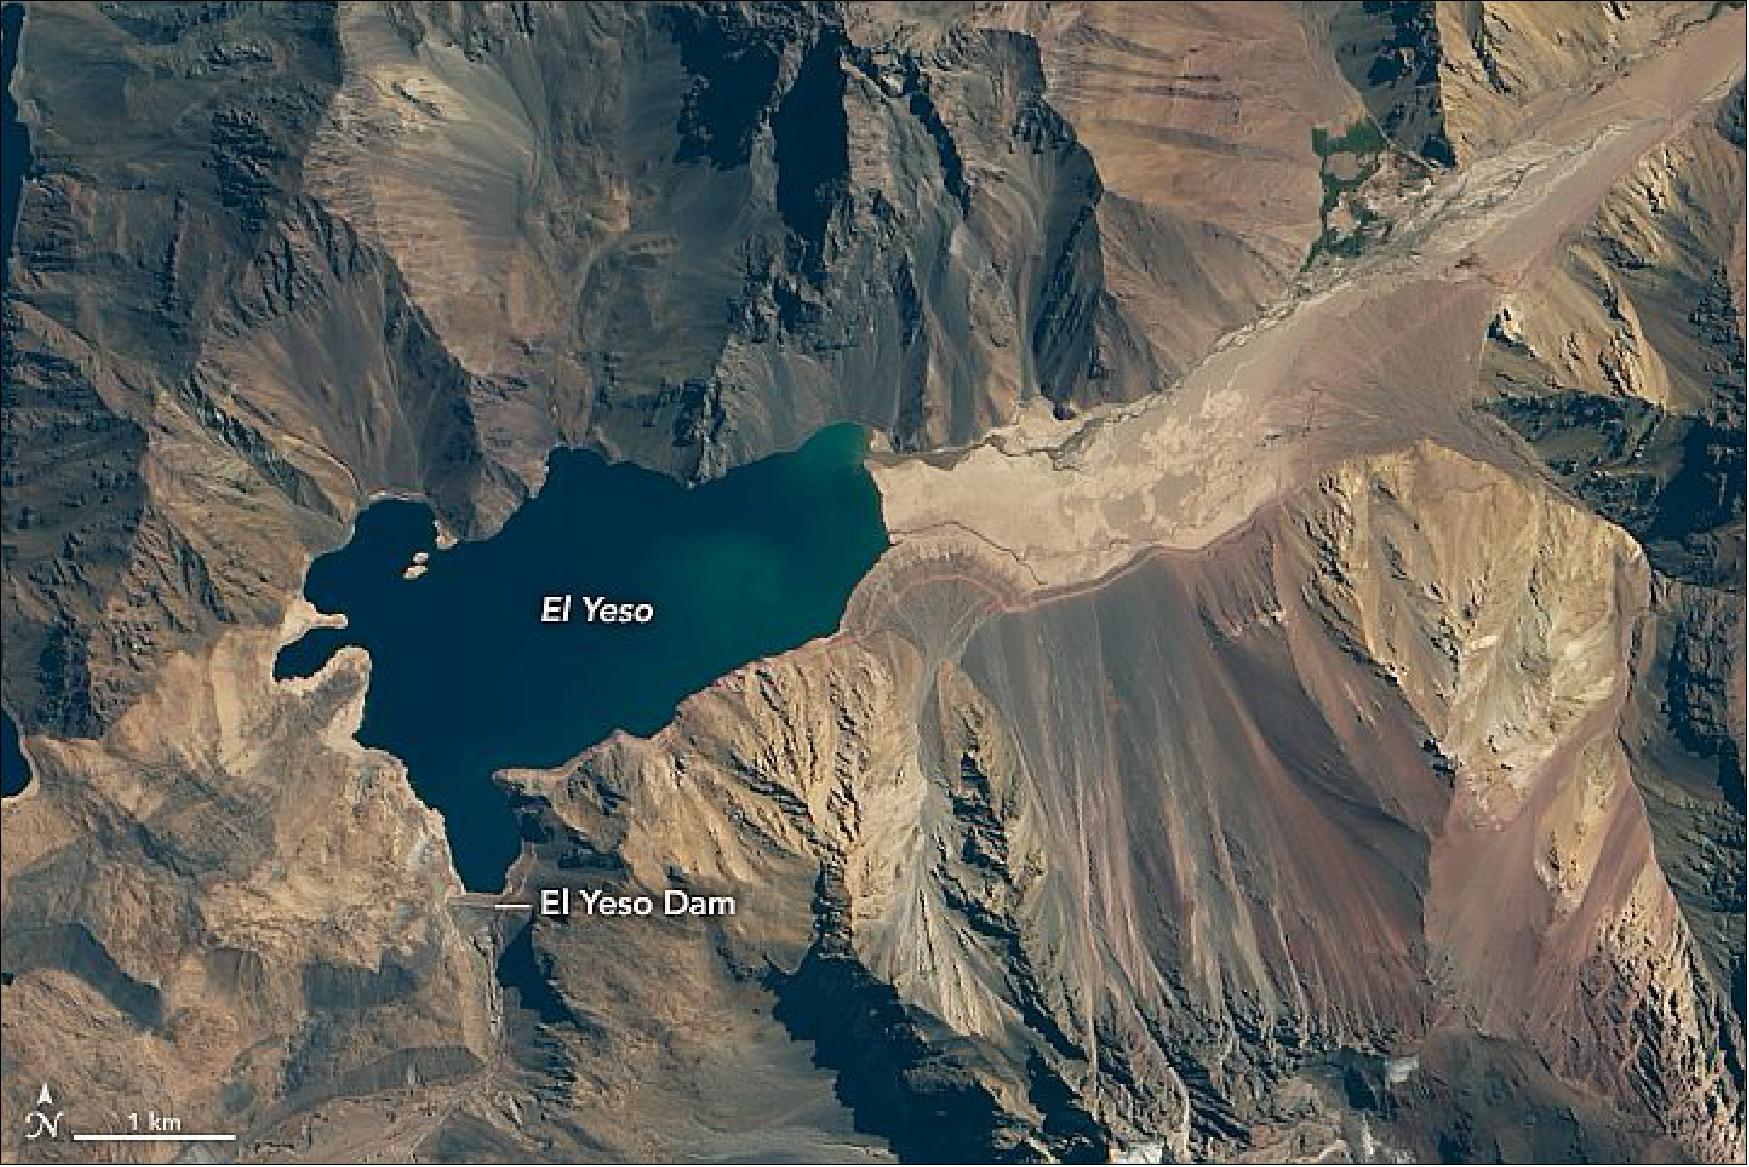 Figure 102: As a persistent drought drags on, water levels are dropping at a key reservoir that supplies Santiago. OLI image on Landsat-8 of the El Yeso reservoir acquired on 14 March 2020 (image credit: NASA Earth Observatory, images by Lauren Dauphin, using Landsat data from the U.S. Geological Survey. Story by Adam Voiland)